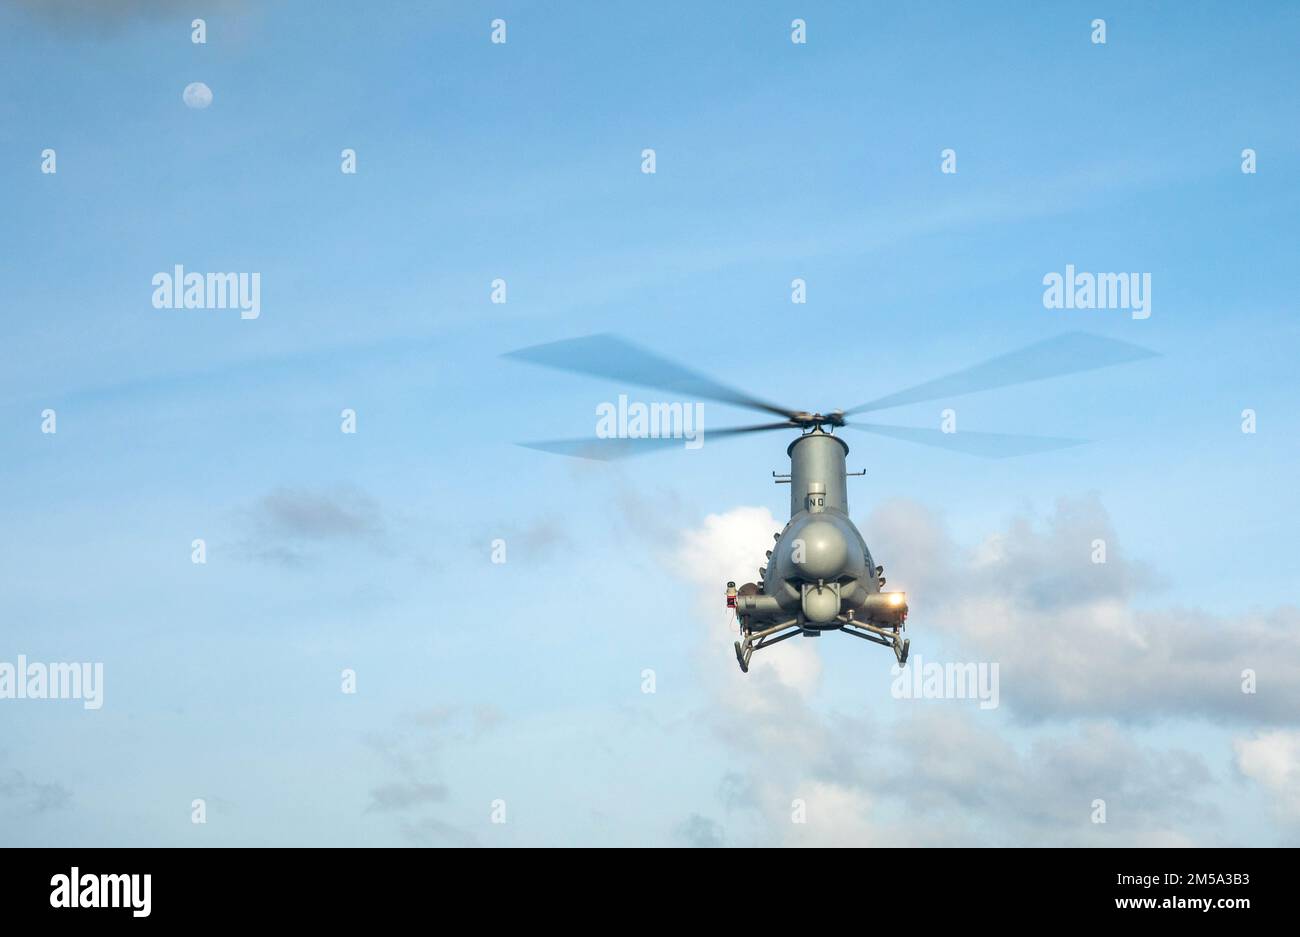 220214-N-LI768-1123  PHILIPPINE SEA (Feb. 14, 2022) – An MQ-8B Fire Scout hovers over the flight deck of the Independence-variant littoral combat ship USS Tulsa (LCS 16). Tulsa, part of Destroyer Squadron (DESRON) 7, is on a rotational deployment, operating in the U.S. 7th Fleet area of operations to enhance interoperability with partners and serve as a ready-response force in support of a free and open Indo-Pacific region. Stock Photo